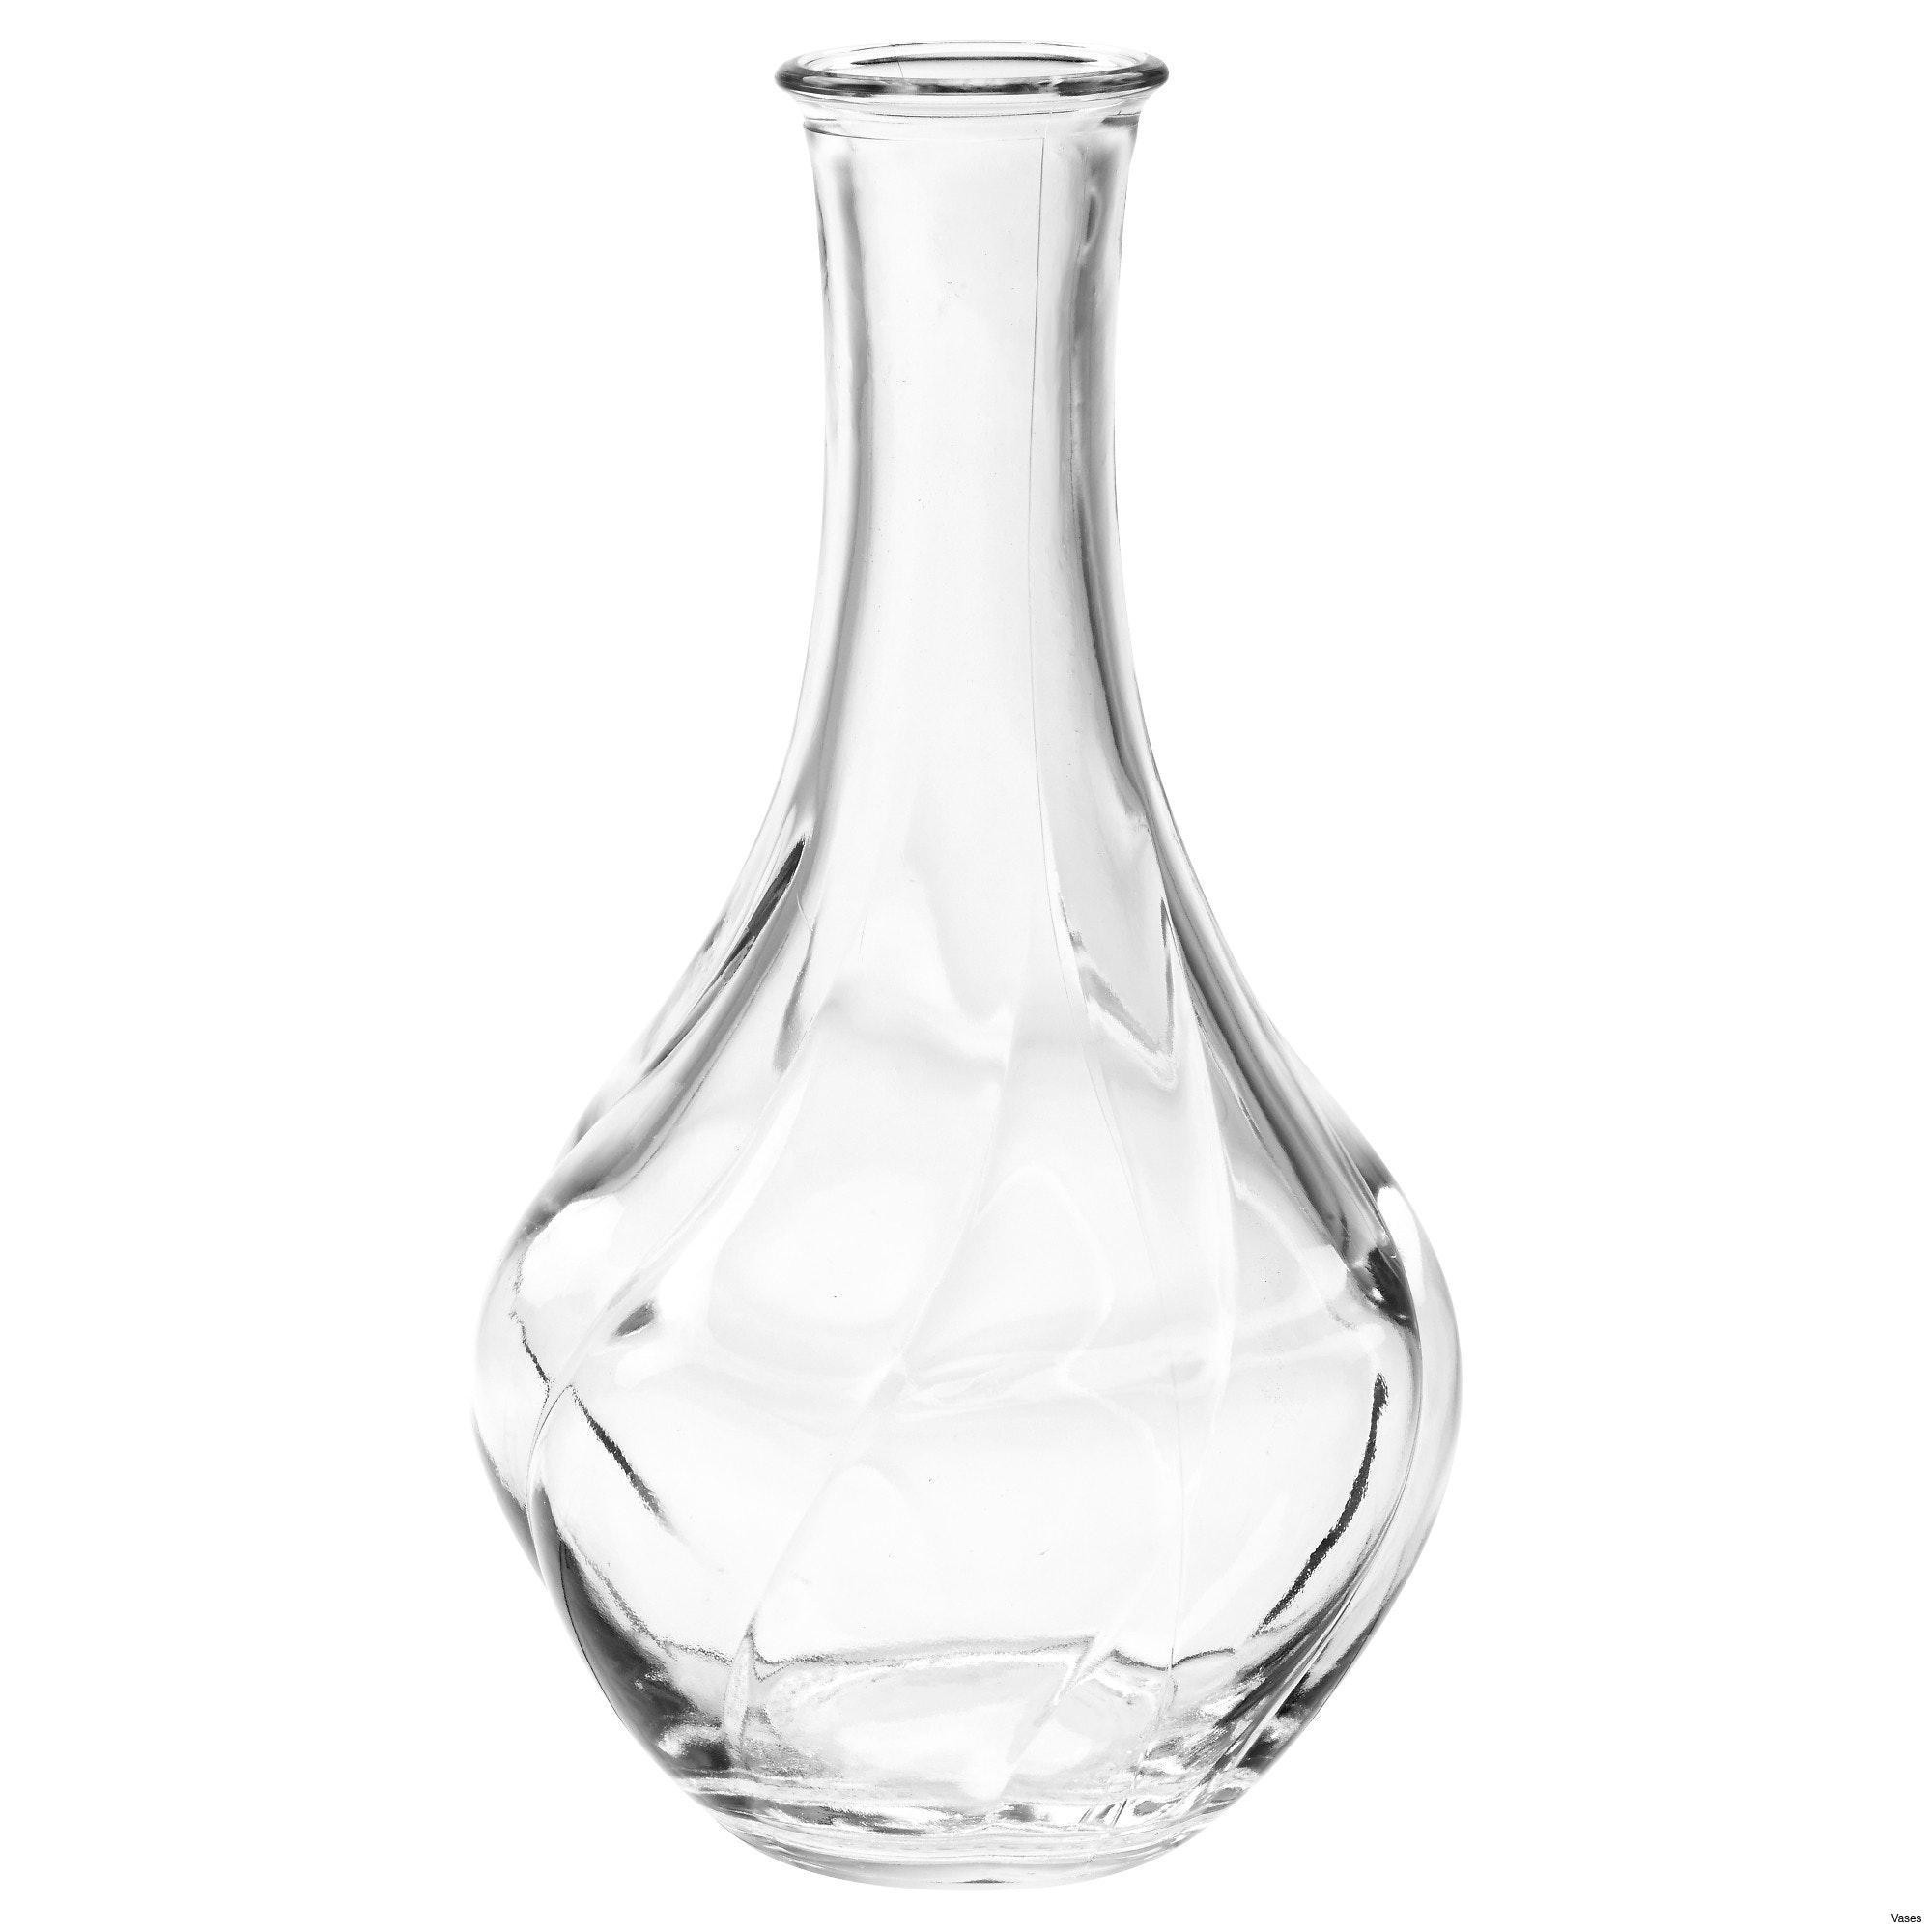 10 Lovable Lenox Bud Vases Set Of 3 2024 free download lenox bud vases set of 3 of huge glass vase collection home design outdoor planters lovely h pertaining to huge glass vase photos living room glass vases fresh clear vase 0d tags amazing and